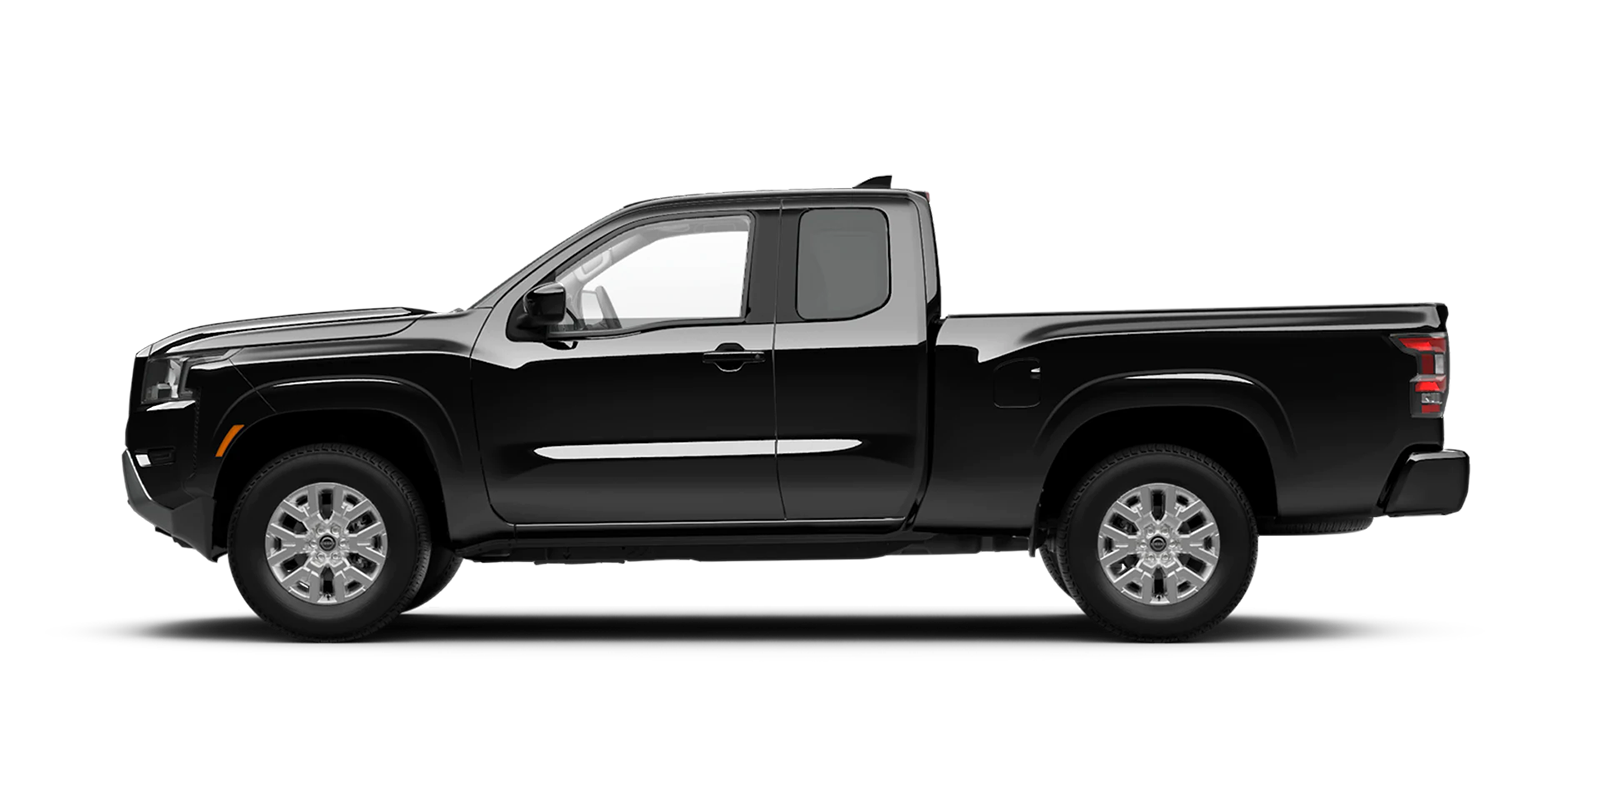 2022 Frontier King Cab SV 4x4 in Super Black | Grainger Nissan of Anderson in Anderson SC